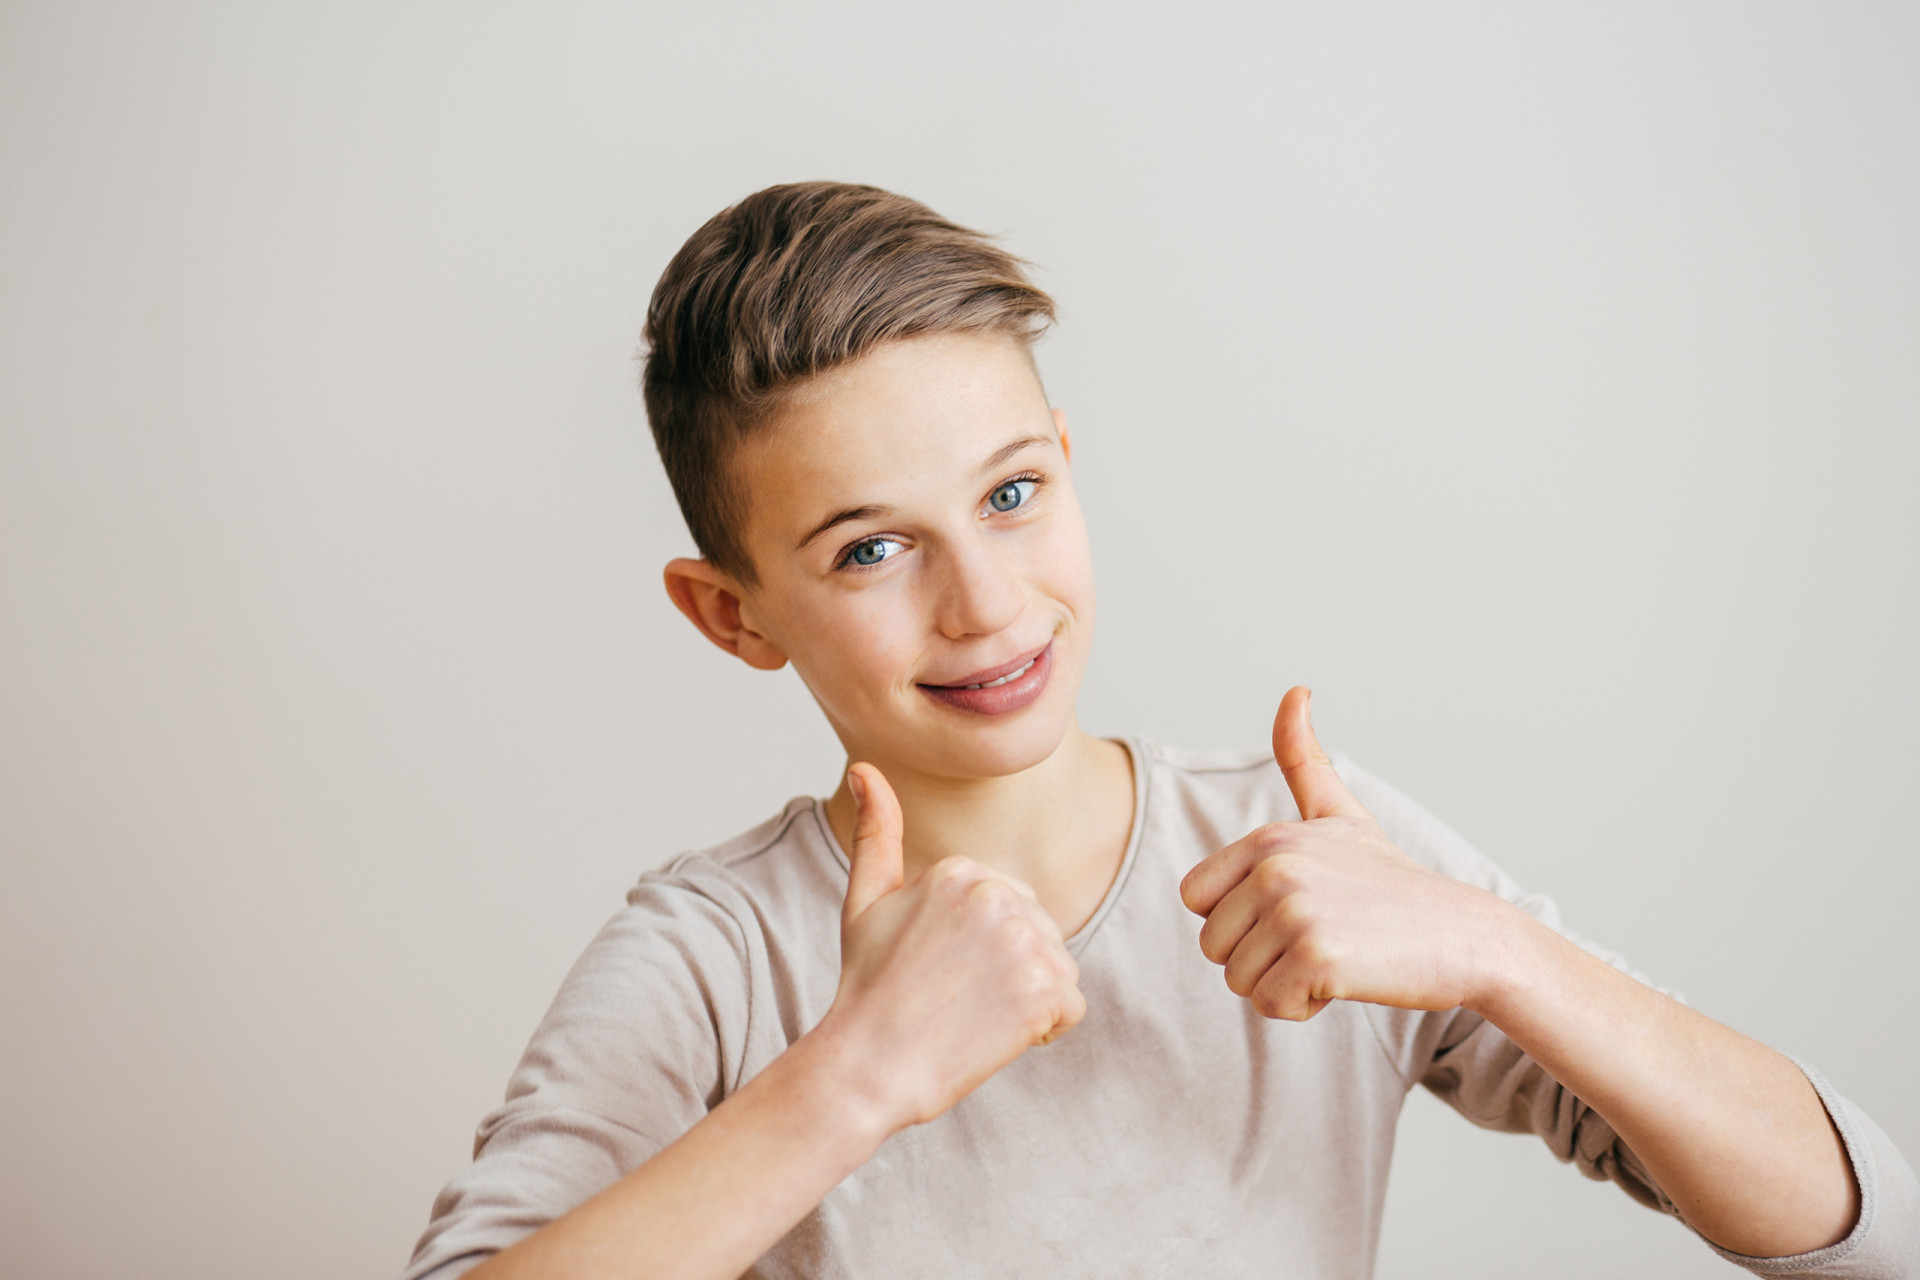 <p>Teaching kids to give genuine compliments uplifts their spirits and others'. It's a simple way to brighten someone's day and create a positive atmosphere.</p><p><a href="https://www.msn.com/en-us/community/channel/vid-7xx8mnucu55yw63we9va2gwr7uihbxwc68fxqp25x6tg4ftibpra?cvid=94631541bc0f4f89bfd59158d696ad7e">Follow us and access great exclusive content every day</a></p>